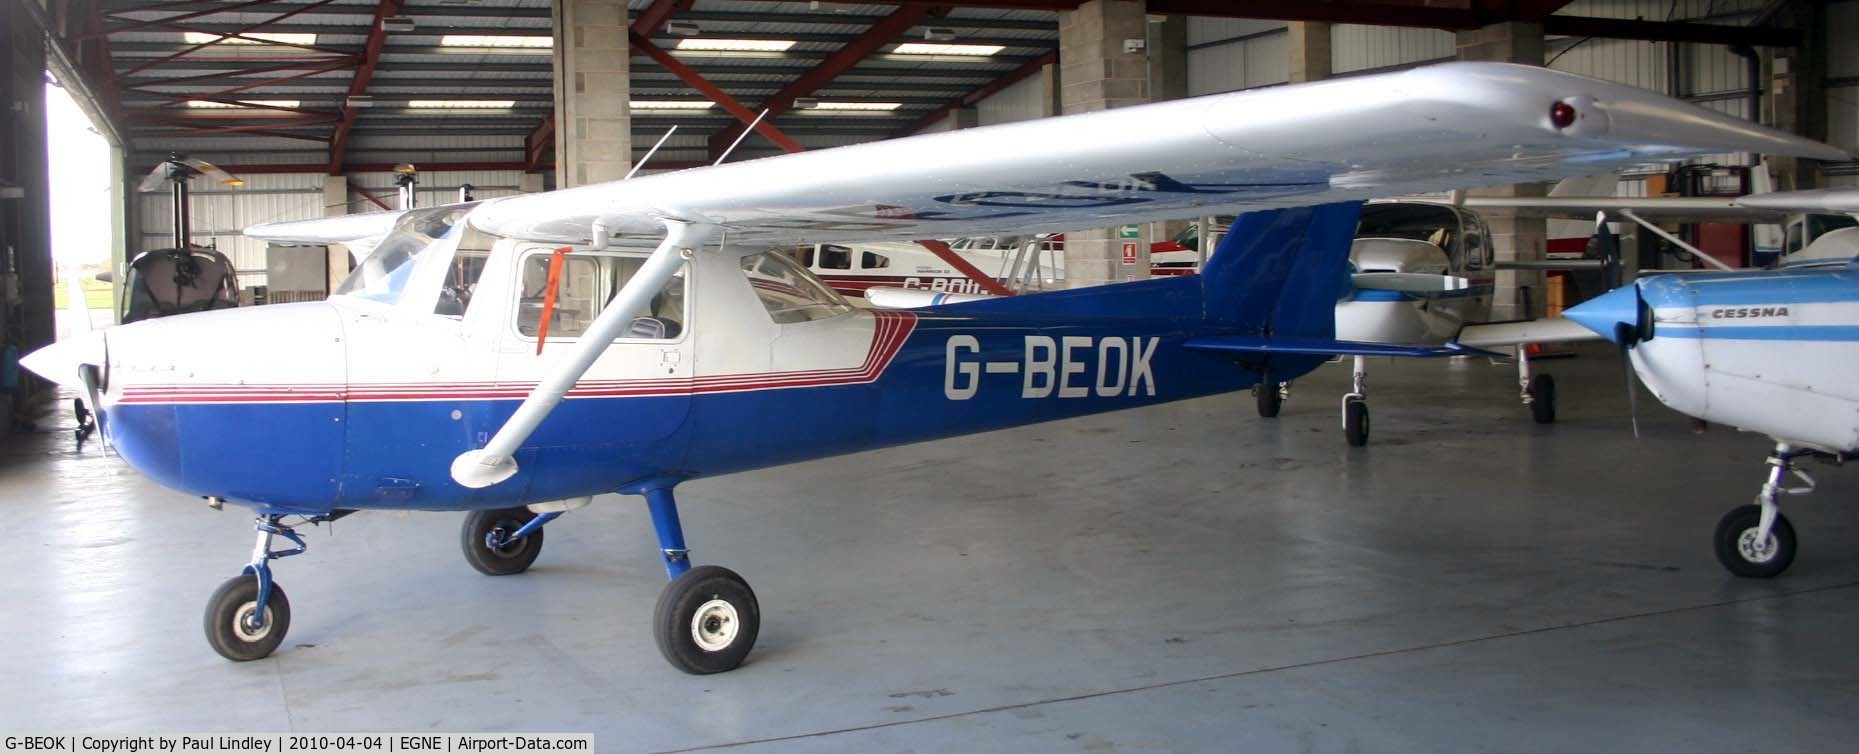 G-BEOK, 1977 Reims F150M C/N 1366, At the Technical college